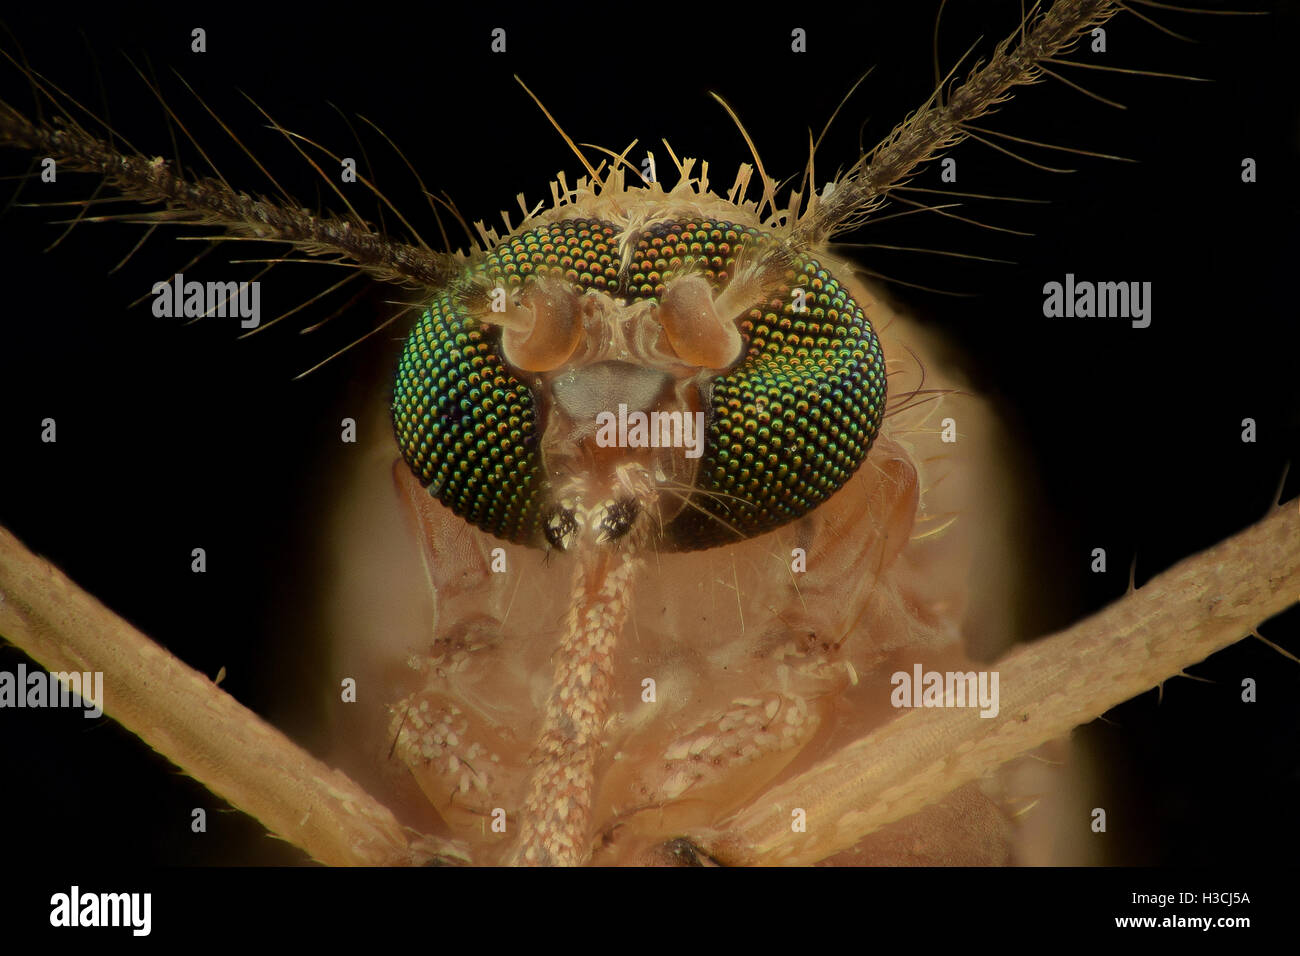 Extreme magnification - Mosquito head, front view Stock Photo